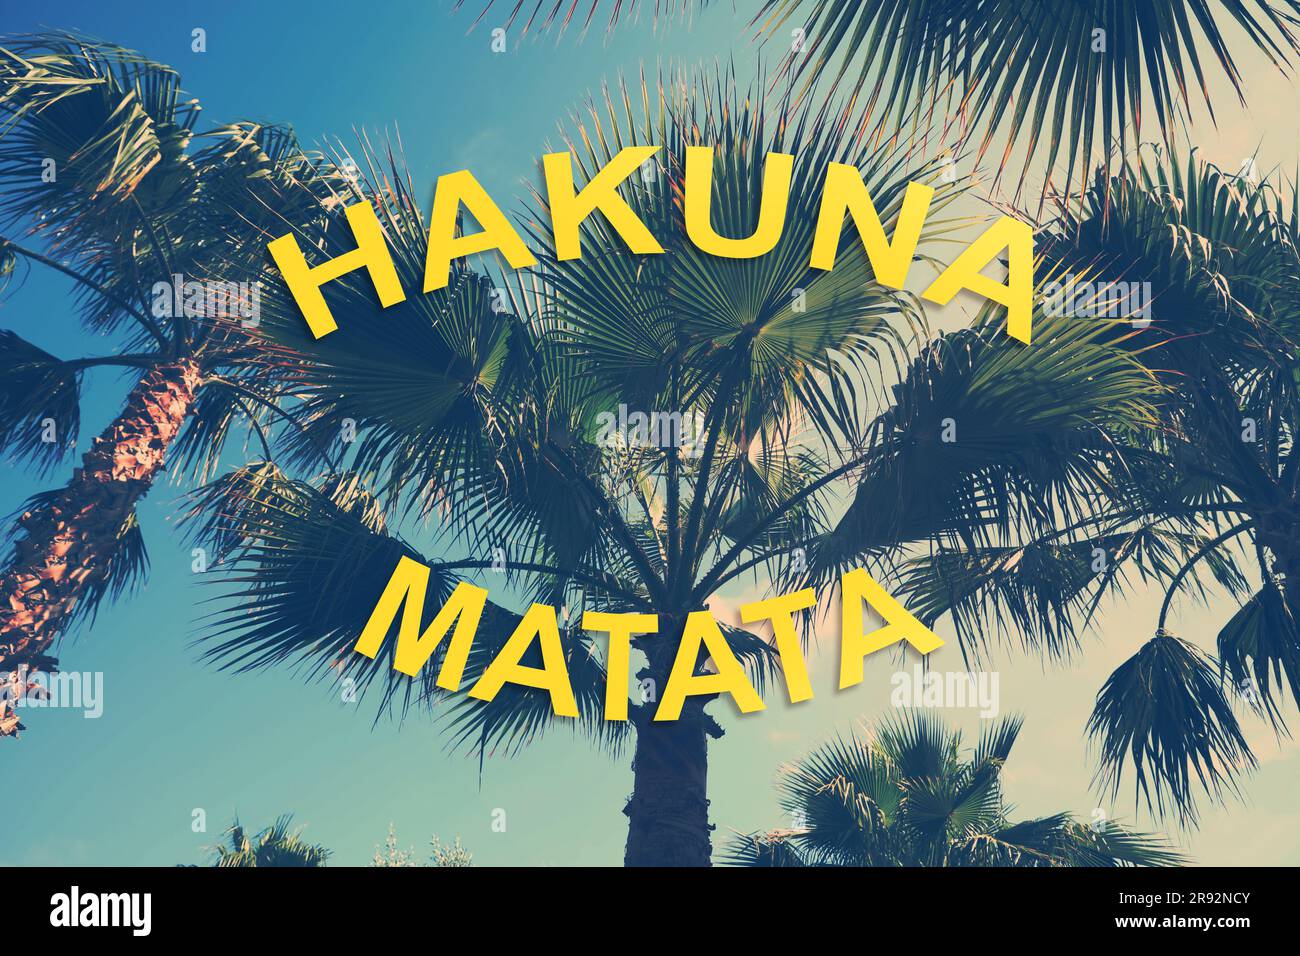 Hakuna Matata, inspirational phrase in Swahili meaning no worries. Palm trees outdoors on sunny summer day, stylized color toning Stock Photo